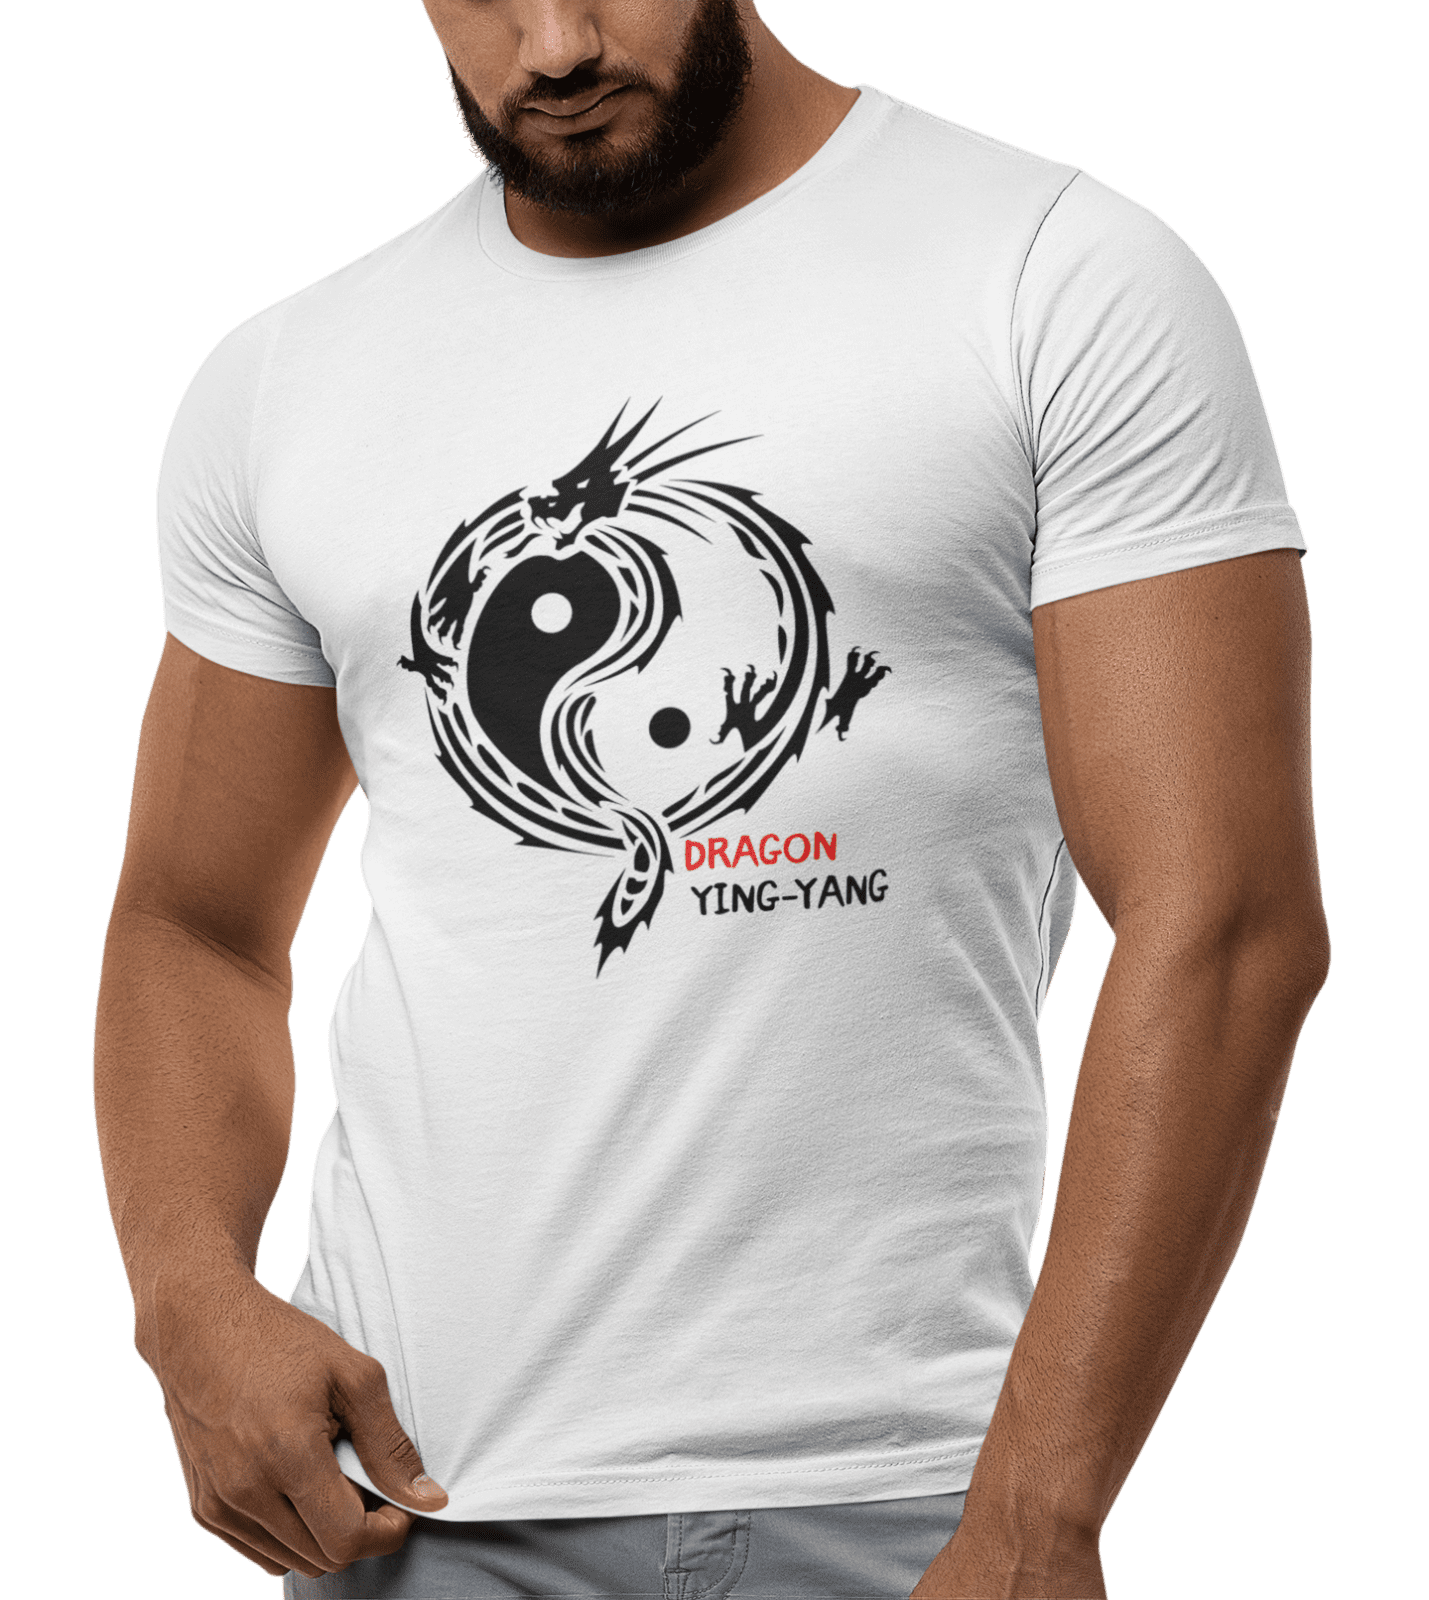 Everything You Need To Know About Branded T-Shirt Design - Kimp